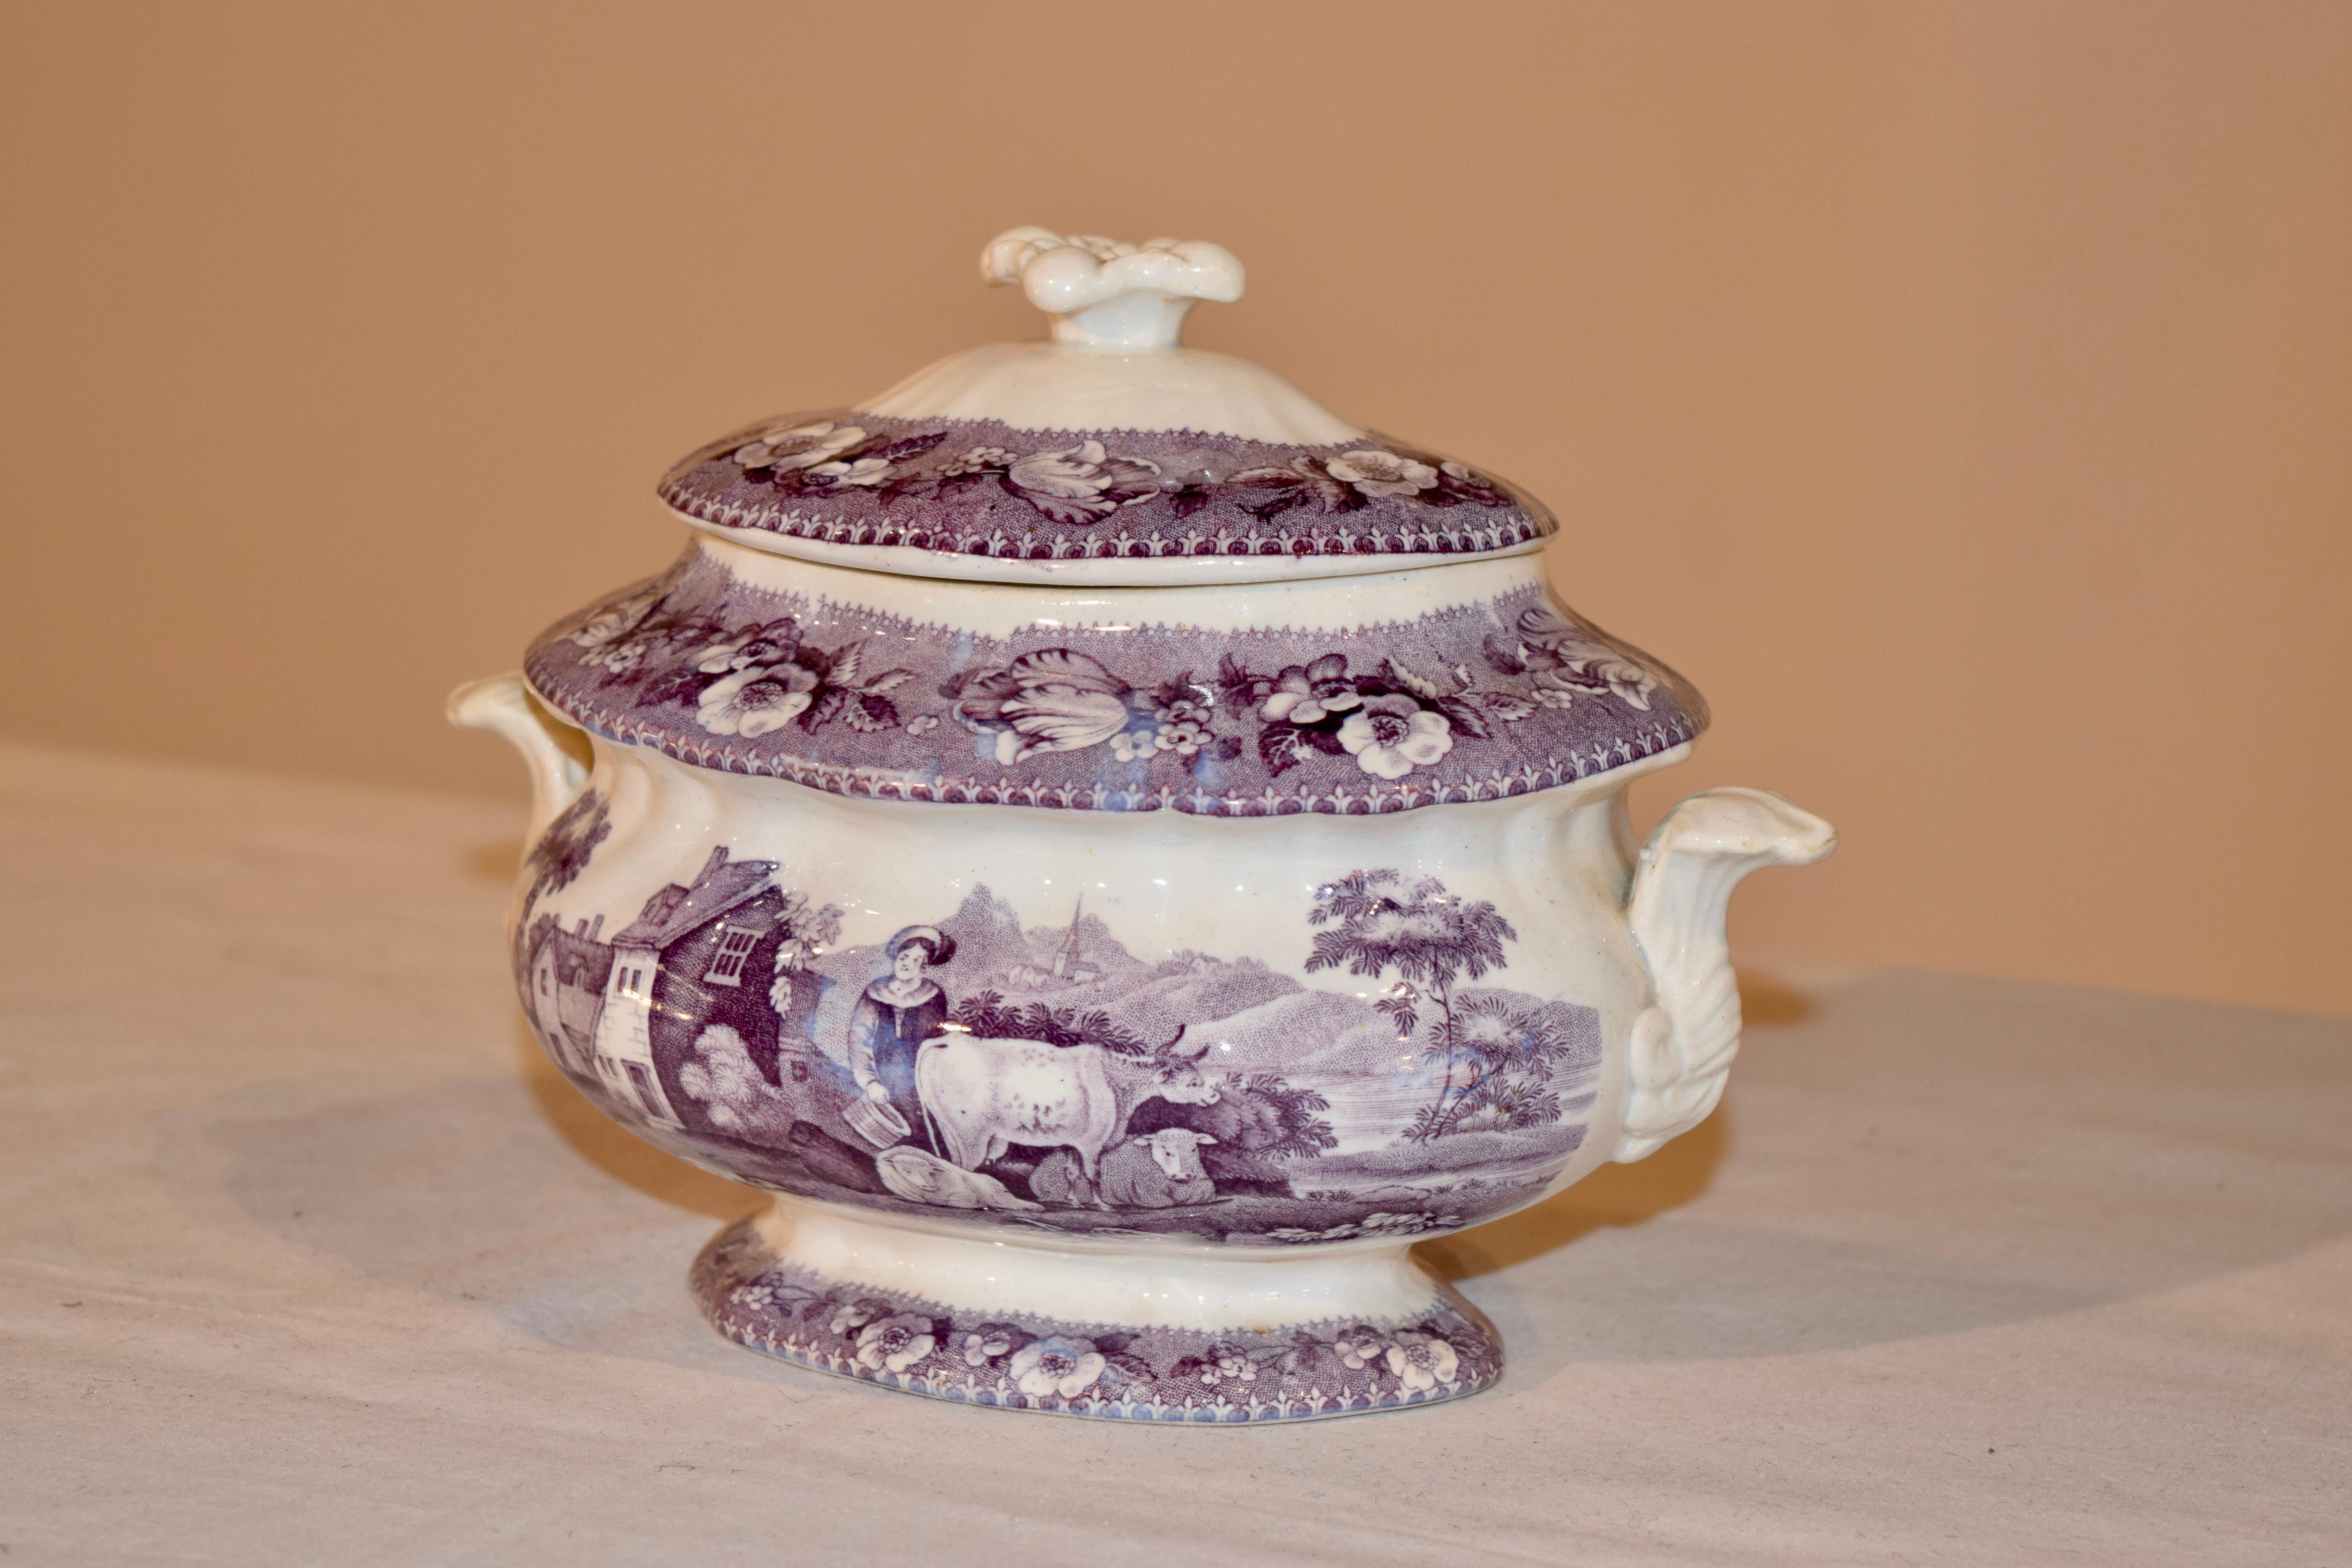 19th century transferware sugar bowl from Staffordshire, England. The pattern is a rich purple color depicting a pastoral scene with a farmhouse in the background and in the foreground a milk maid and a surrounding of cows. Marked with impressed